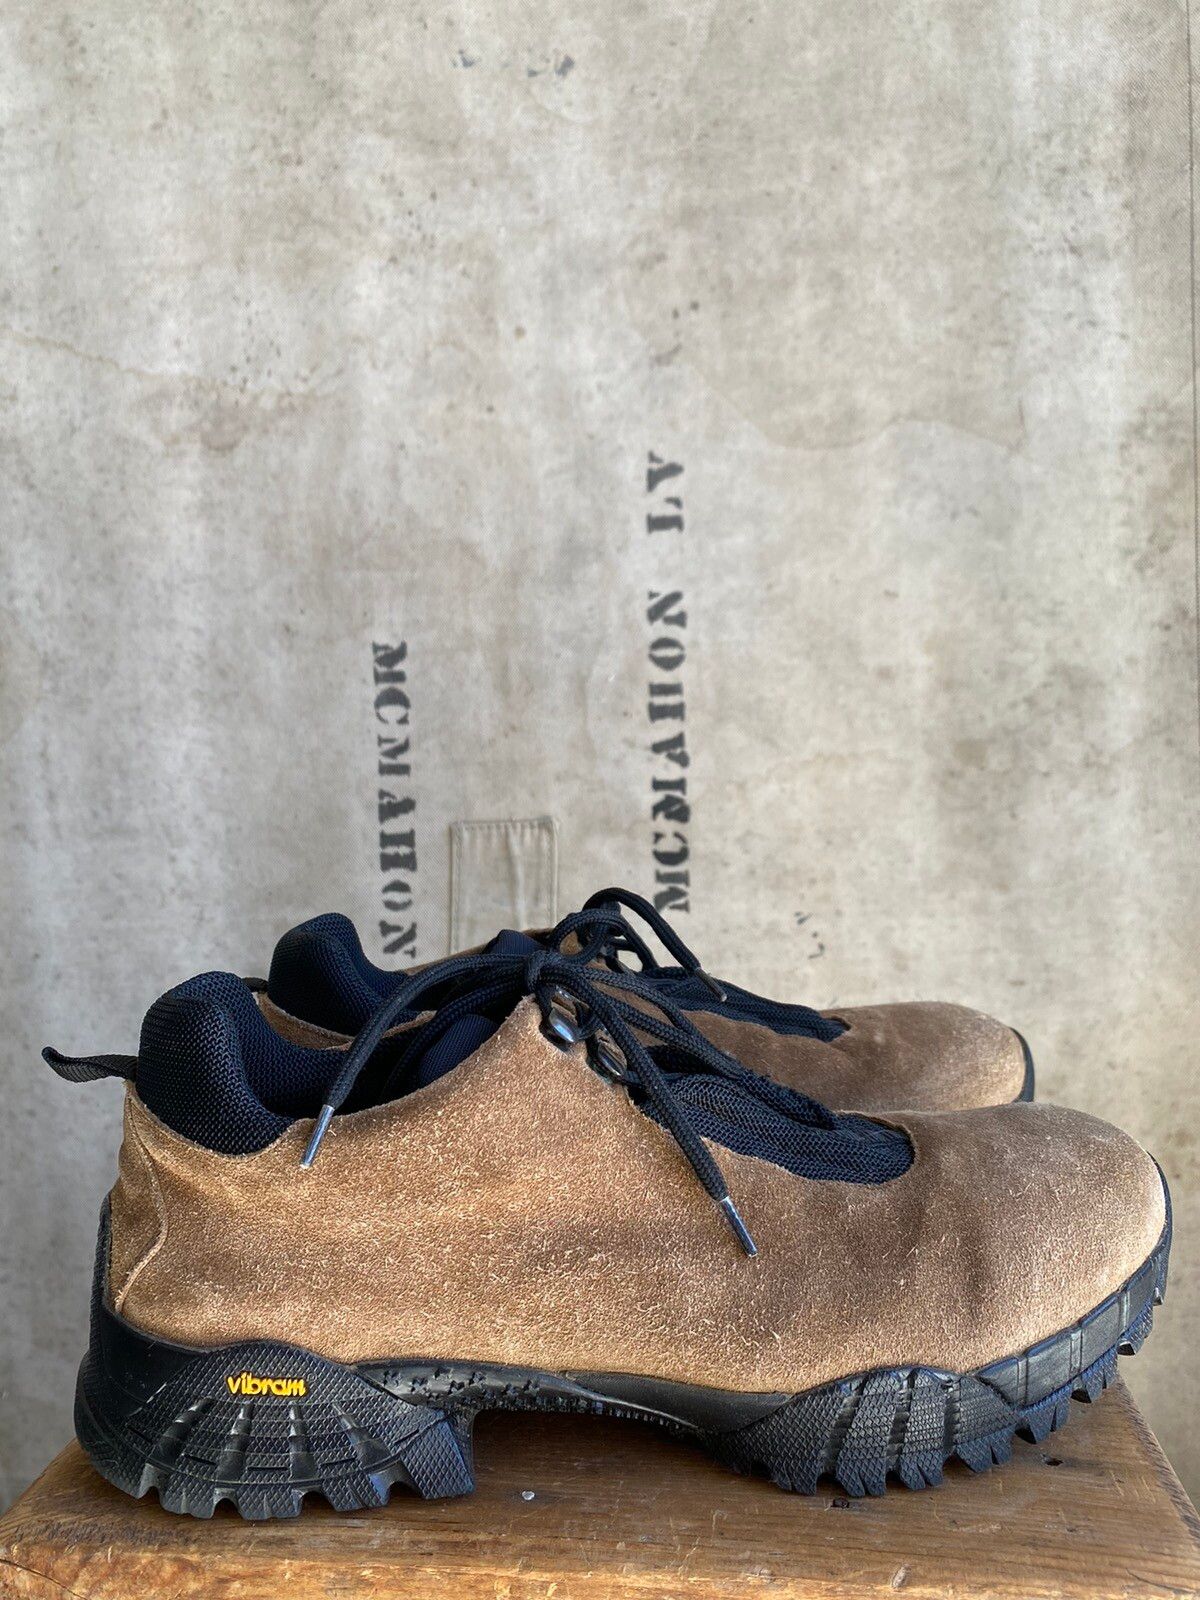 Alyx Alyx Roa Low Brown Suede Hiking Boot’s | Grailed